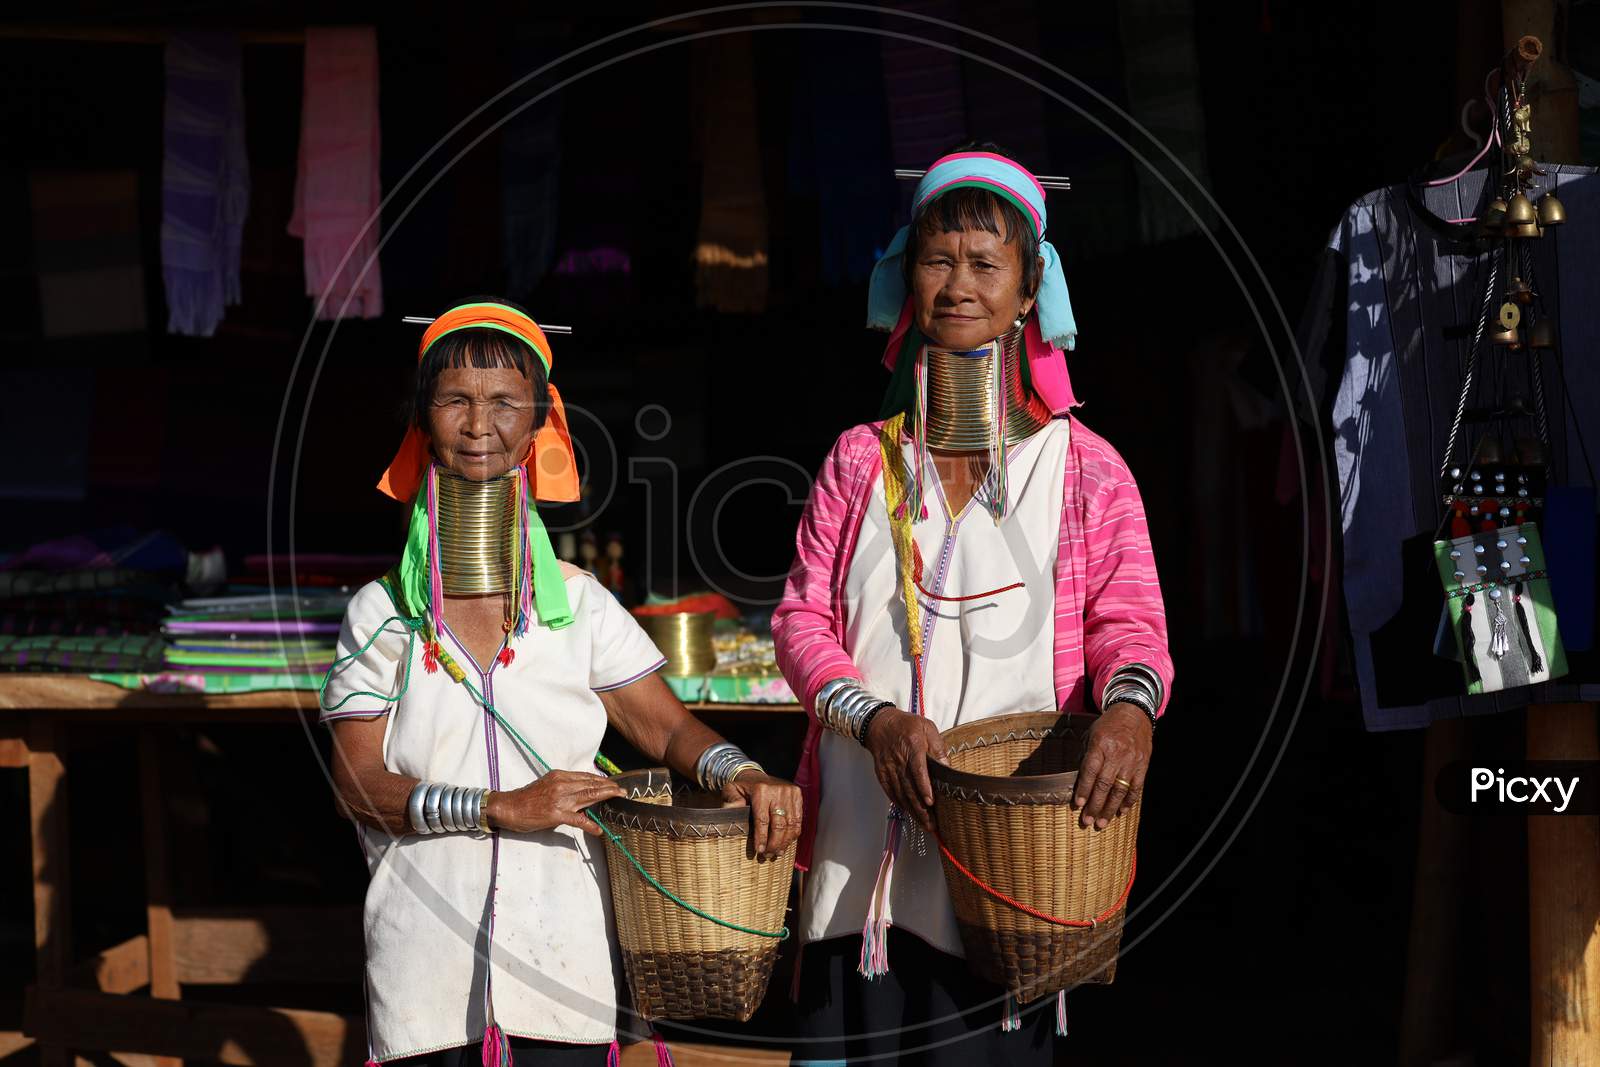 A couple of Old Myanmar Women's with Neck Rings